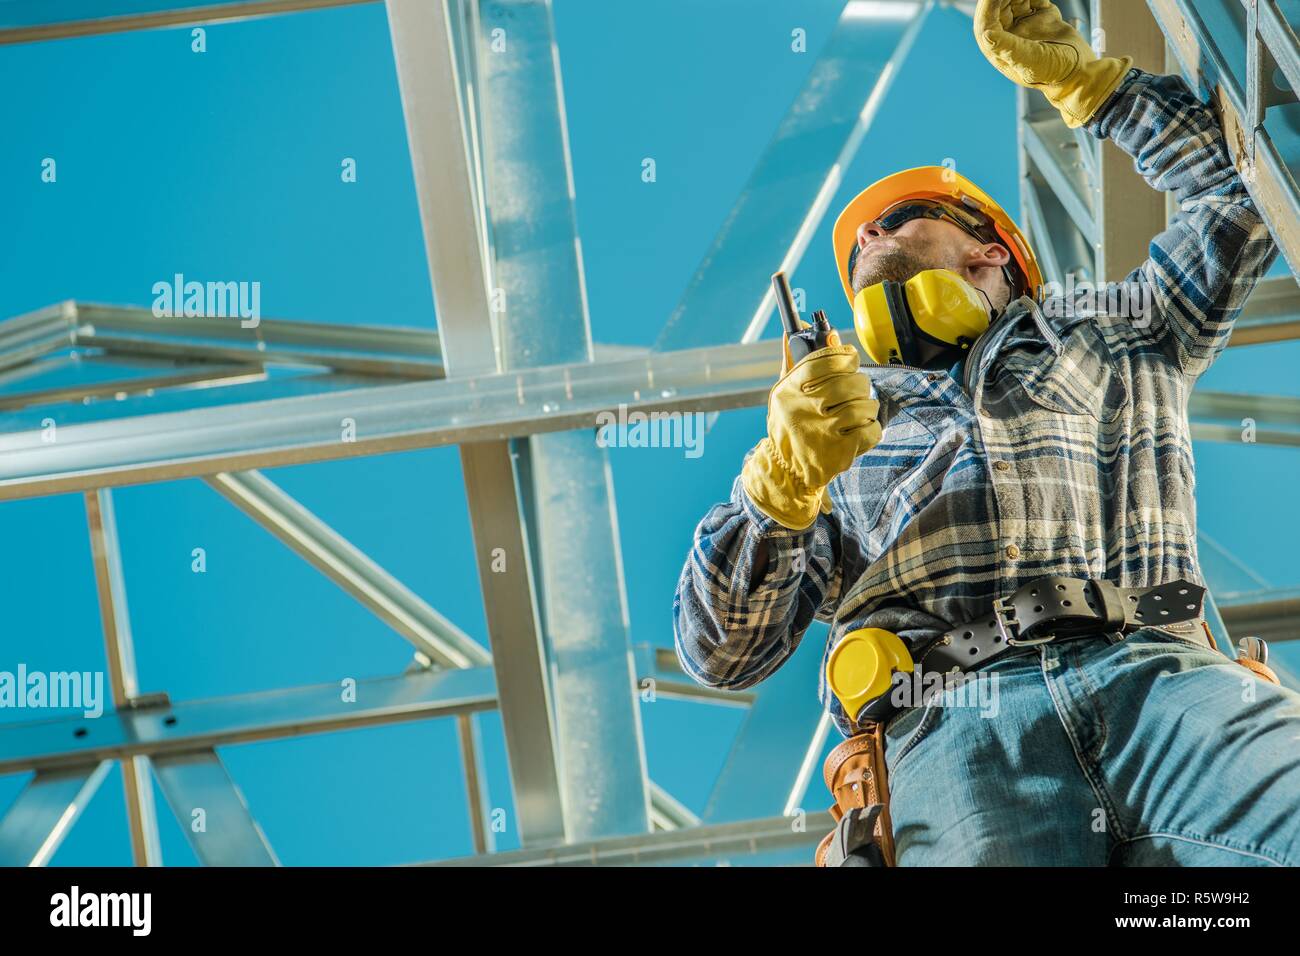 Construction Worker on Duty. Caucasian Contractor with Walkie Talkie and the Skeleton Steel Project. Industrial Site. Stock Photo